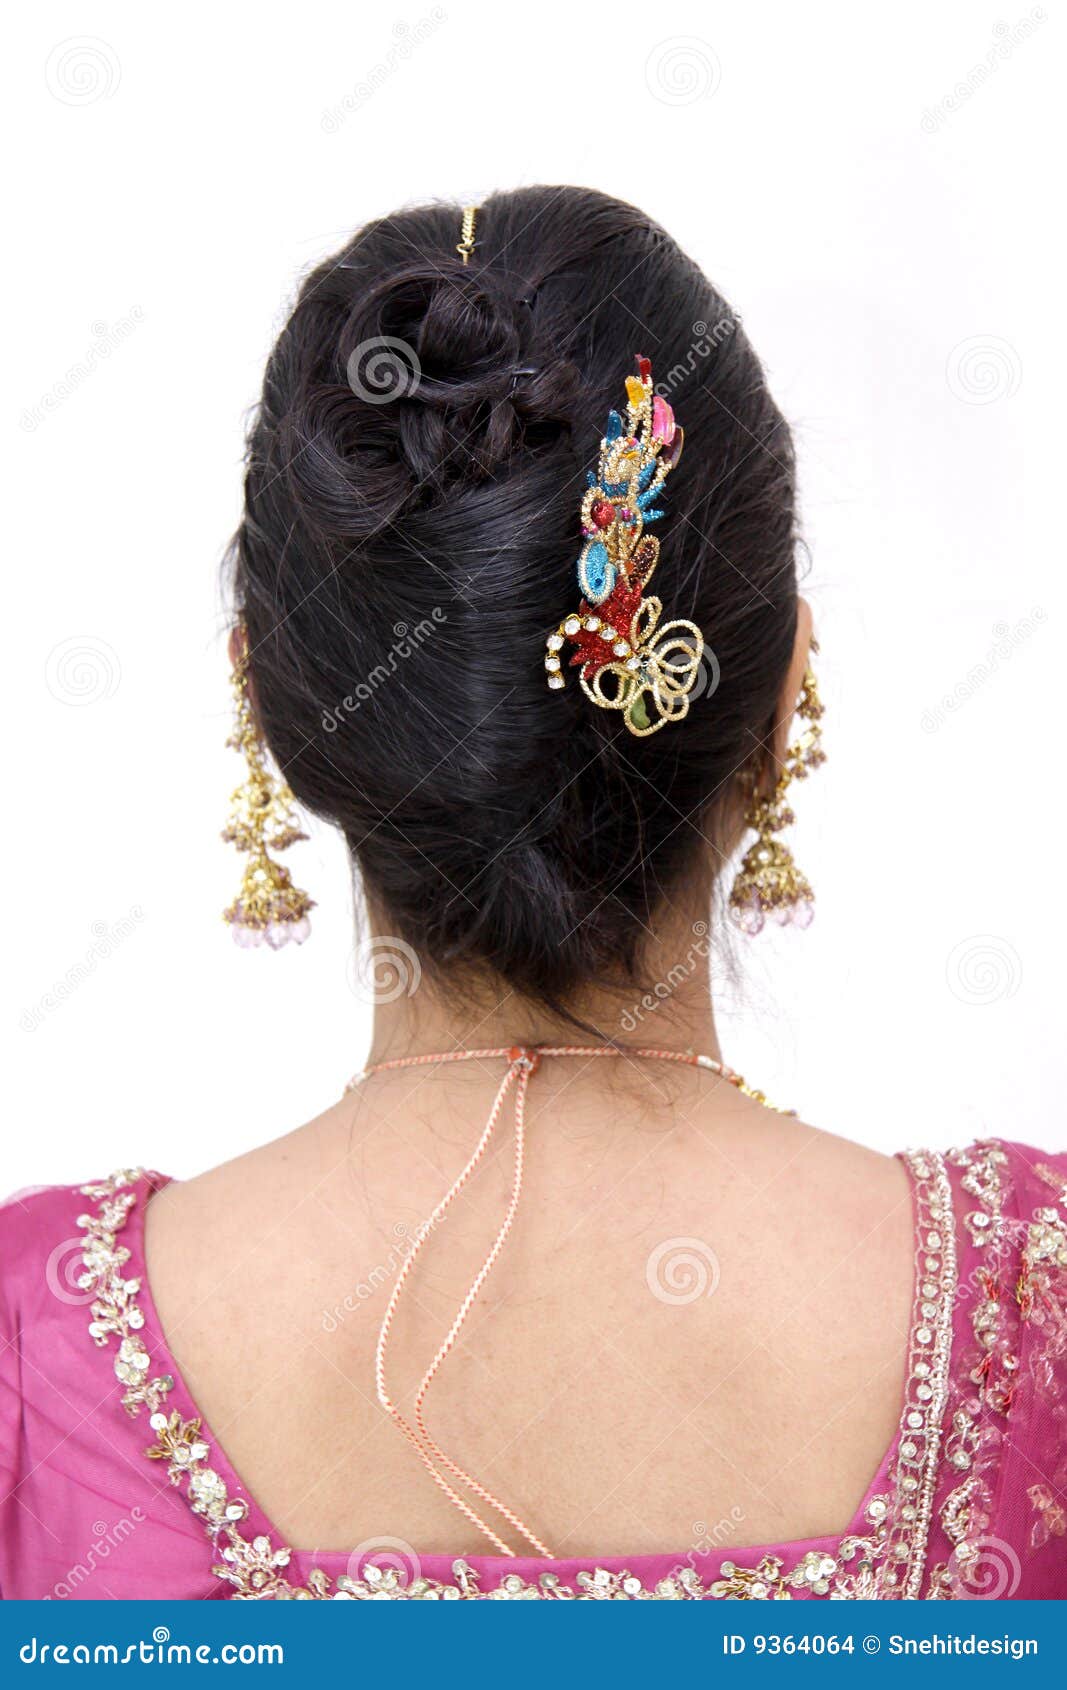 Hair Style Of An Indian Woman Stock Images - Image: 9364064